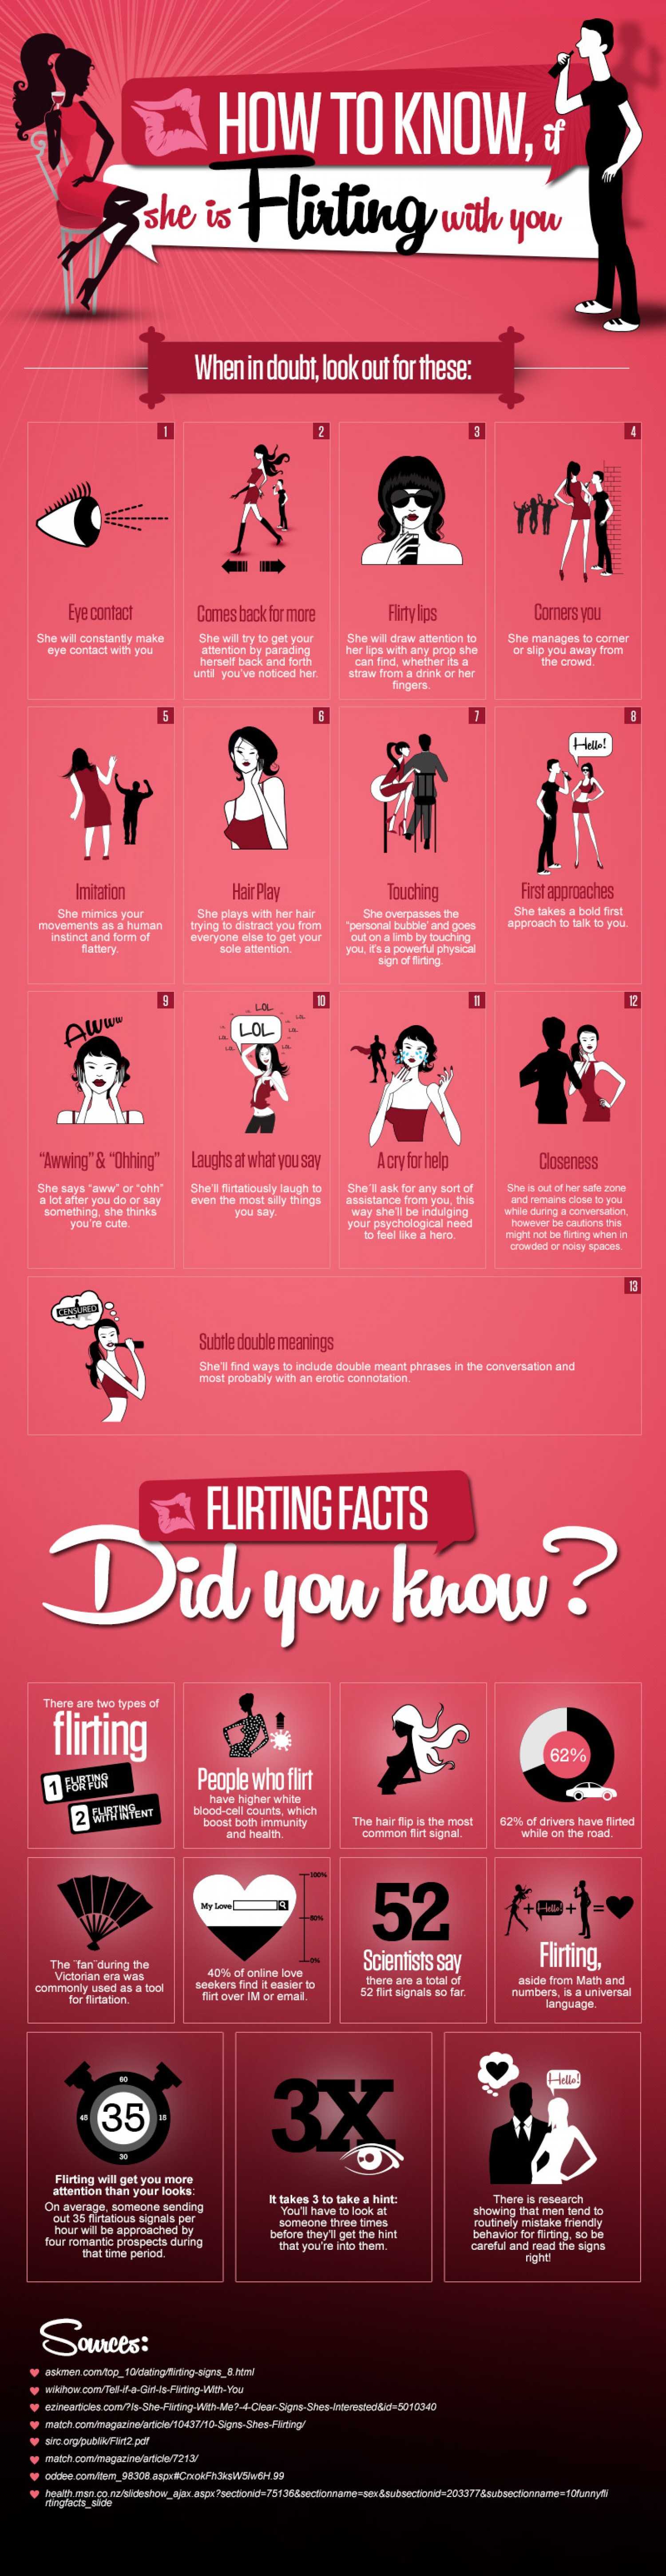 How To Know If She Is Flirting With You